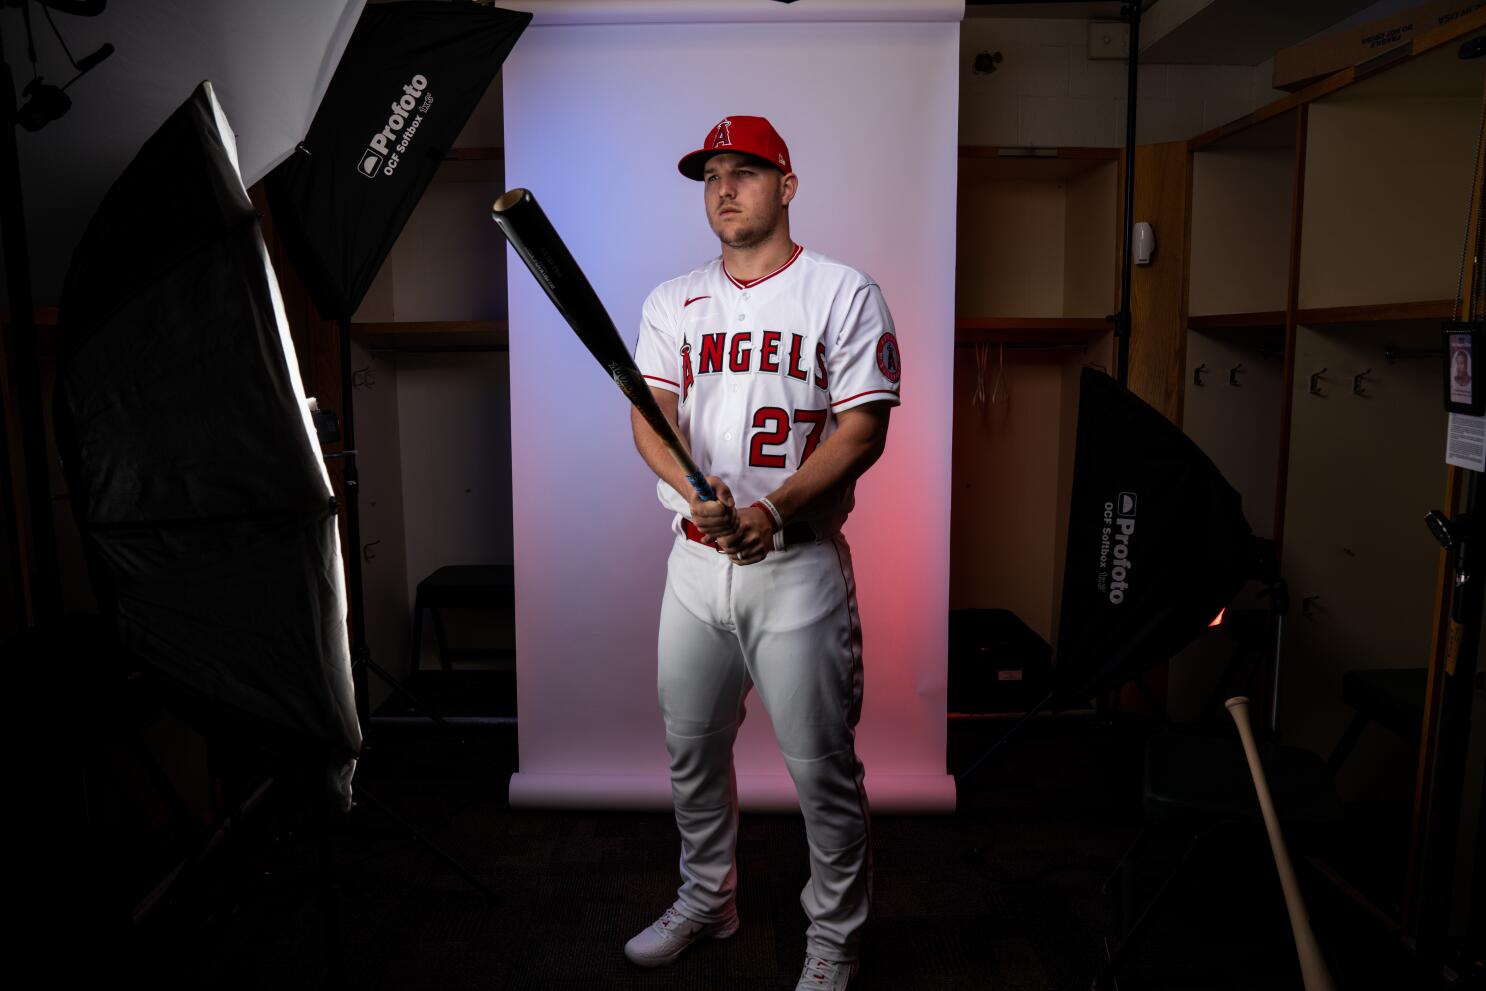 Angels' Mike Trout, Dodgers' Jaime Jarrín voice 'Opening Day at